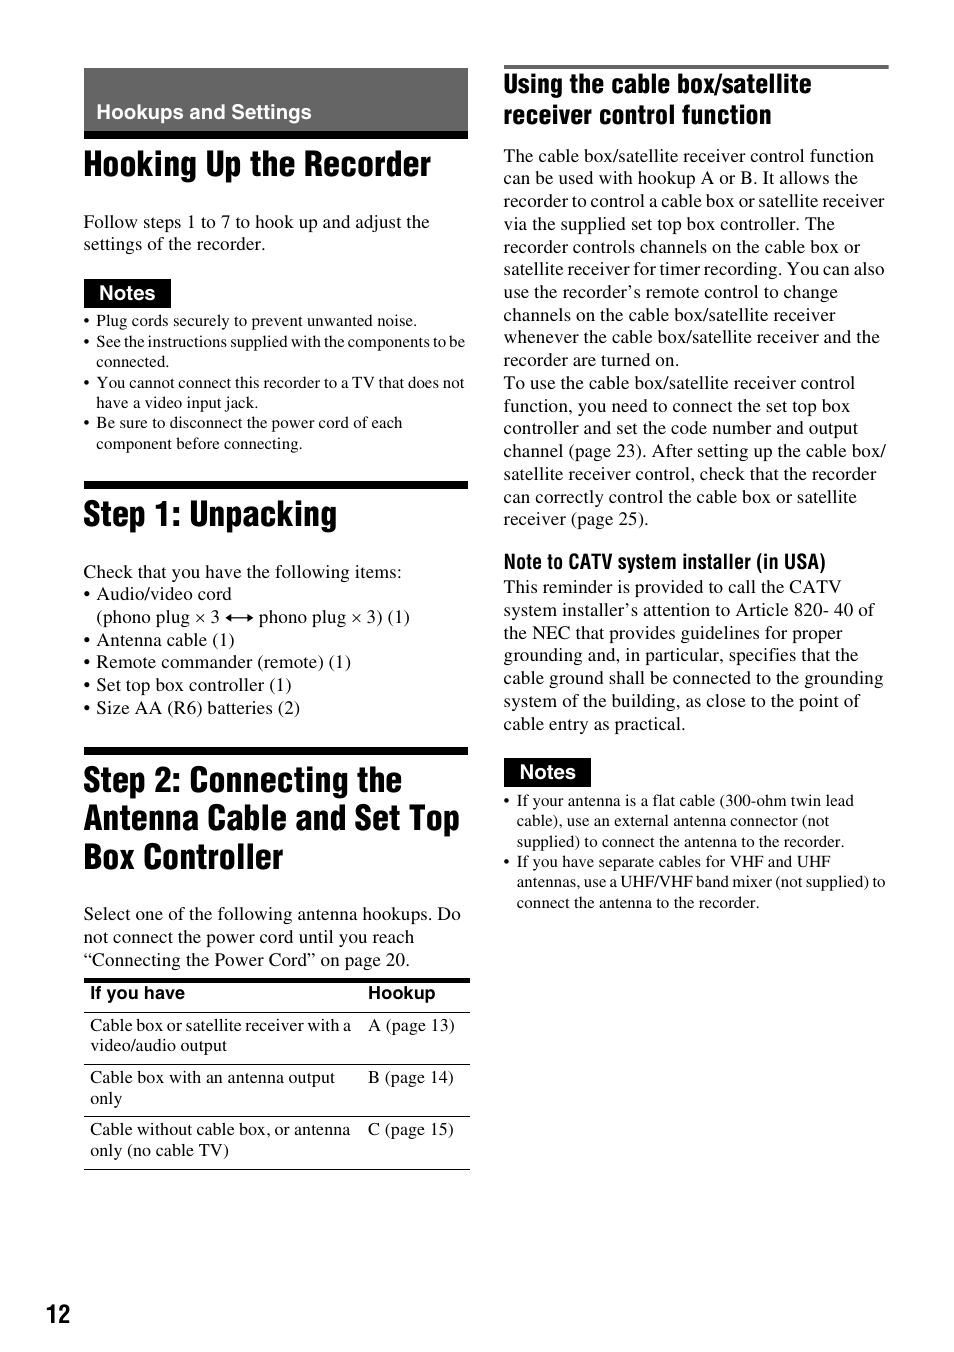 Hookups and settings, Hooking up the recorder, Step 1: unpacking | Sony RDR-VX521 User Manual | Page 12 / 132